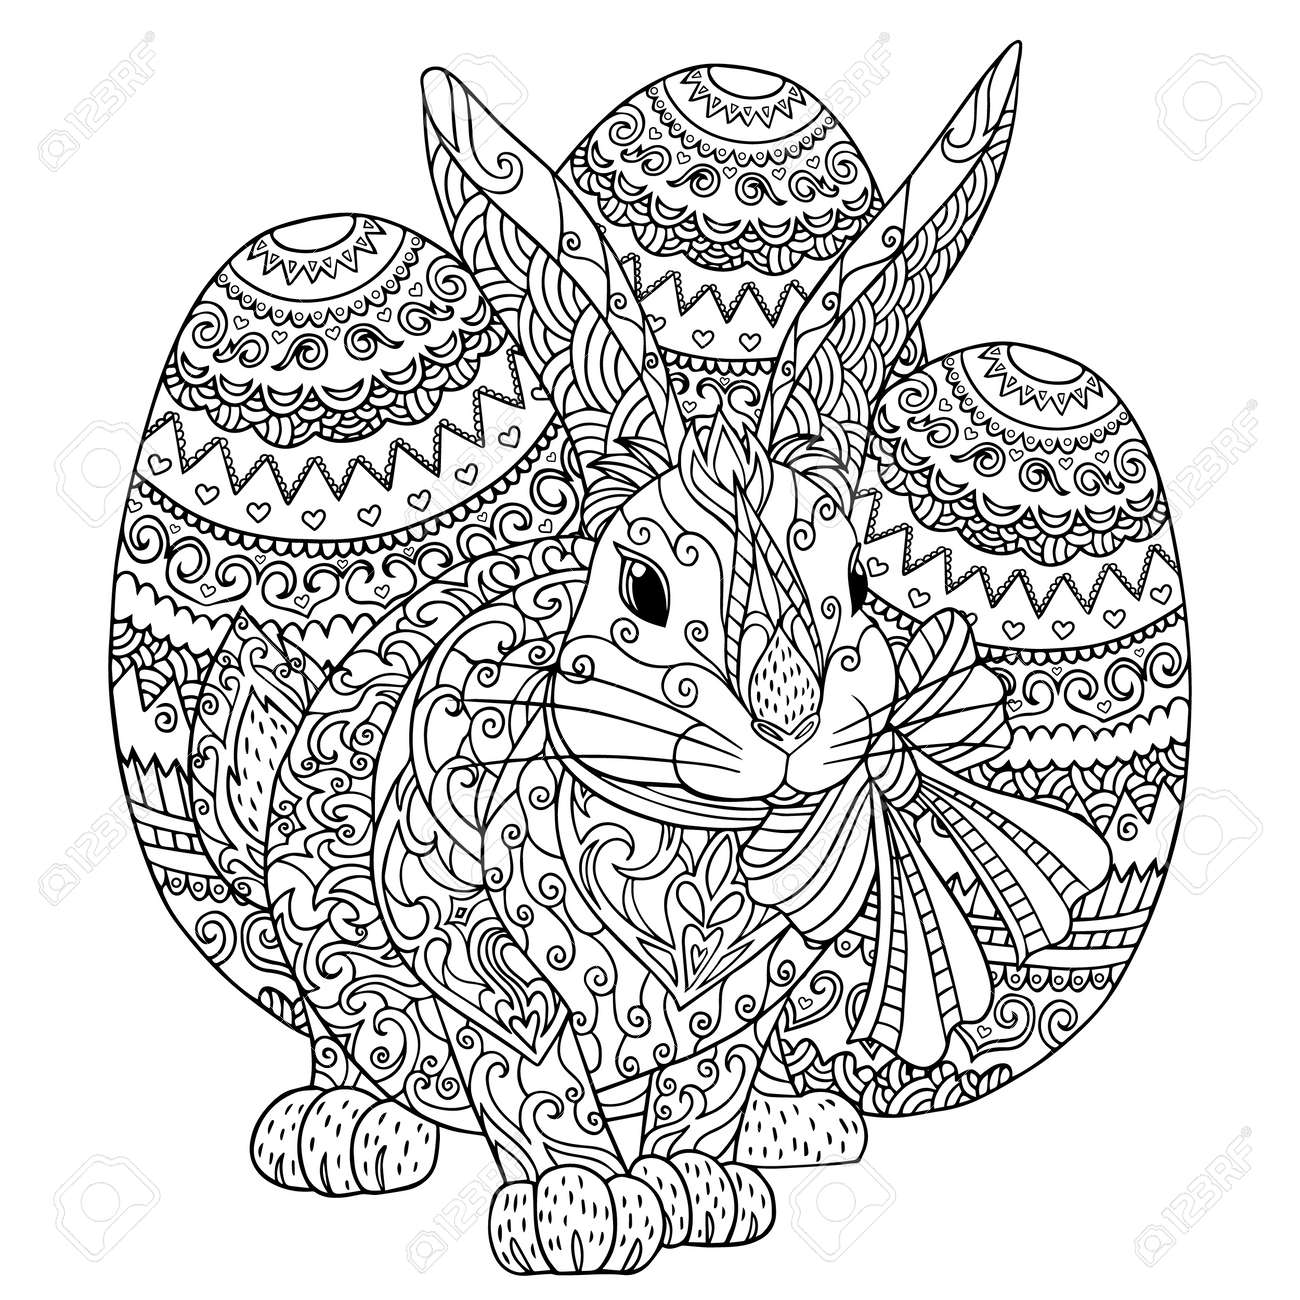 Coloring page rabbit with easter eggs vector outline illustration with doodle and zentangle elements for coloring book for adult bunny with long ears and decorative elements royalty free svg cliparts vectors and